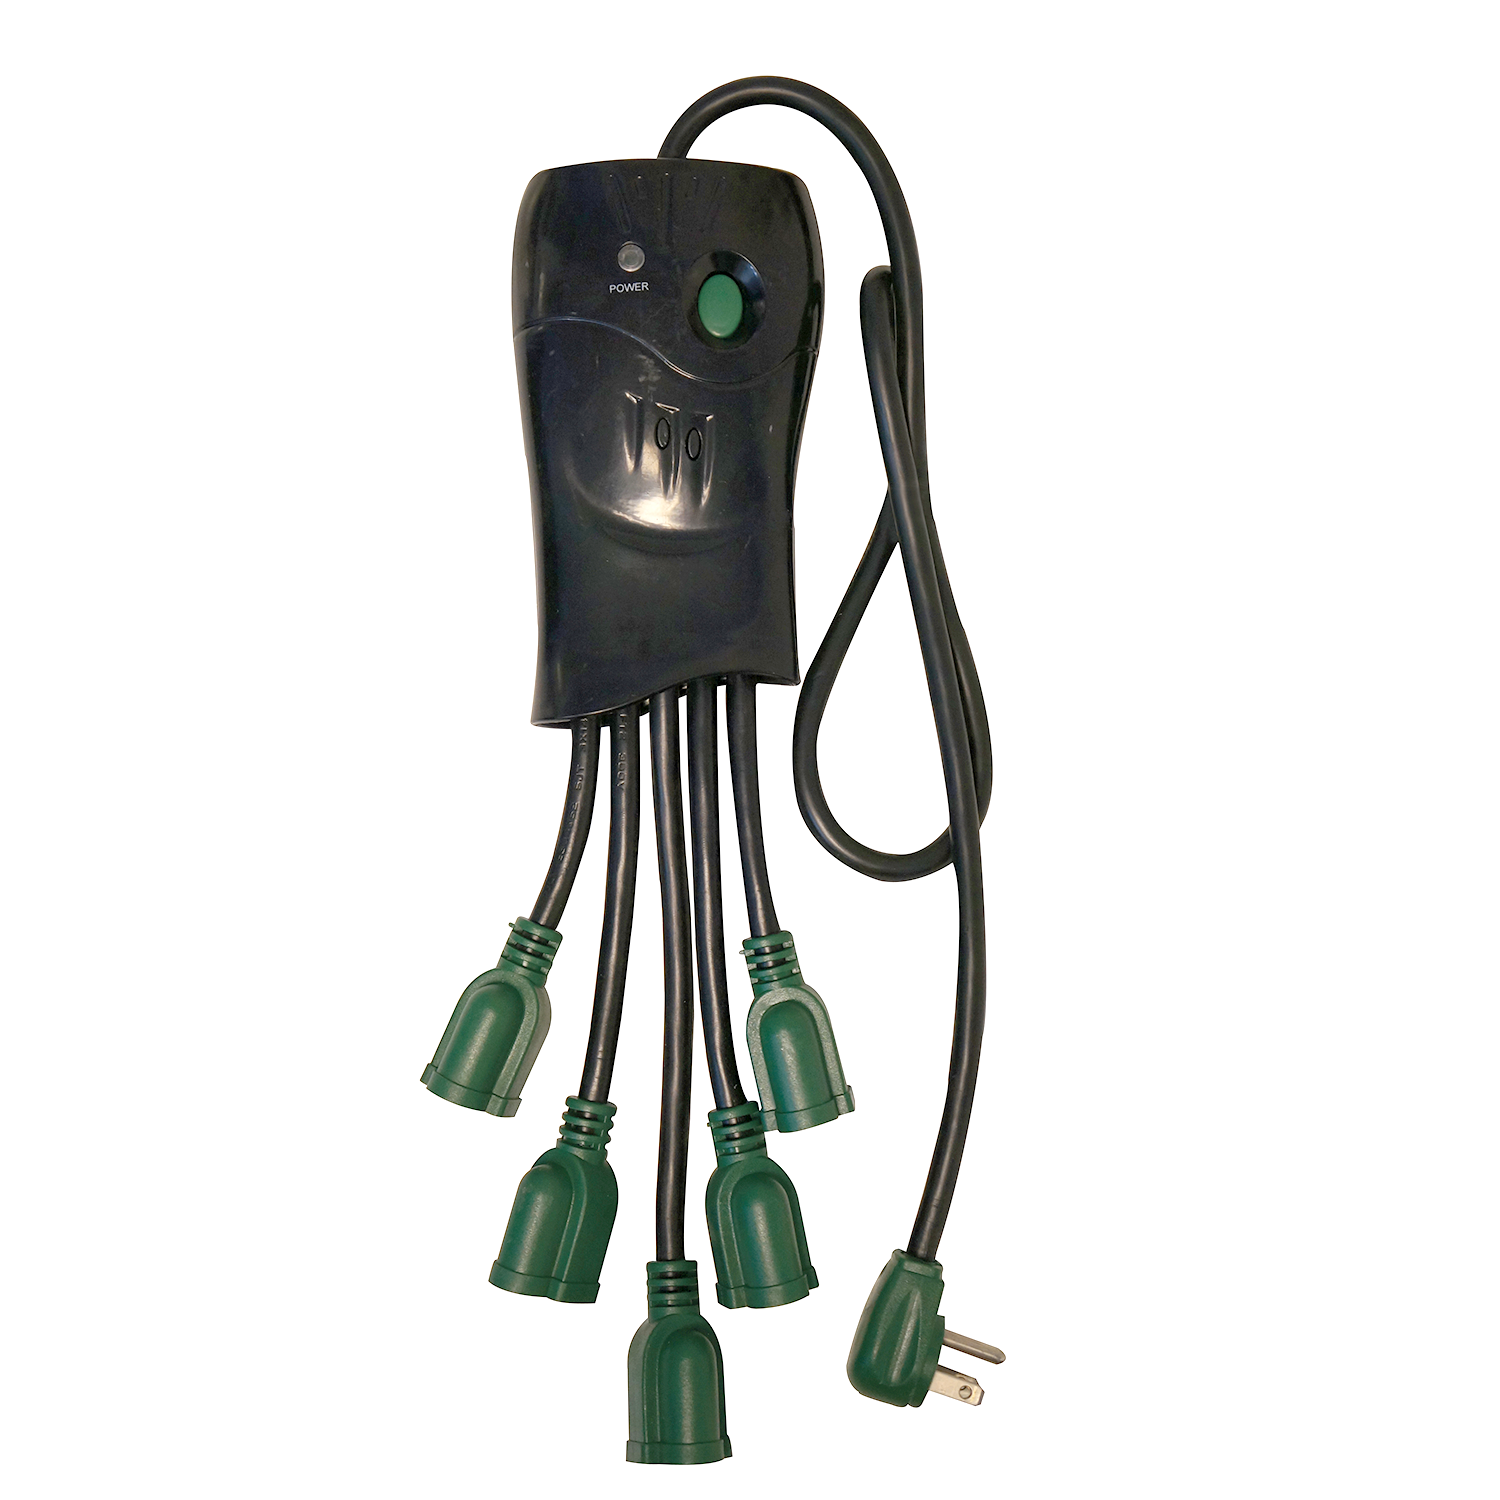 GoGreen Power (GG-5OCT) 5 Outlet Surge Protector, Black - image 1 of 4